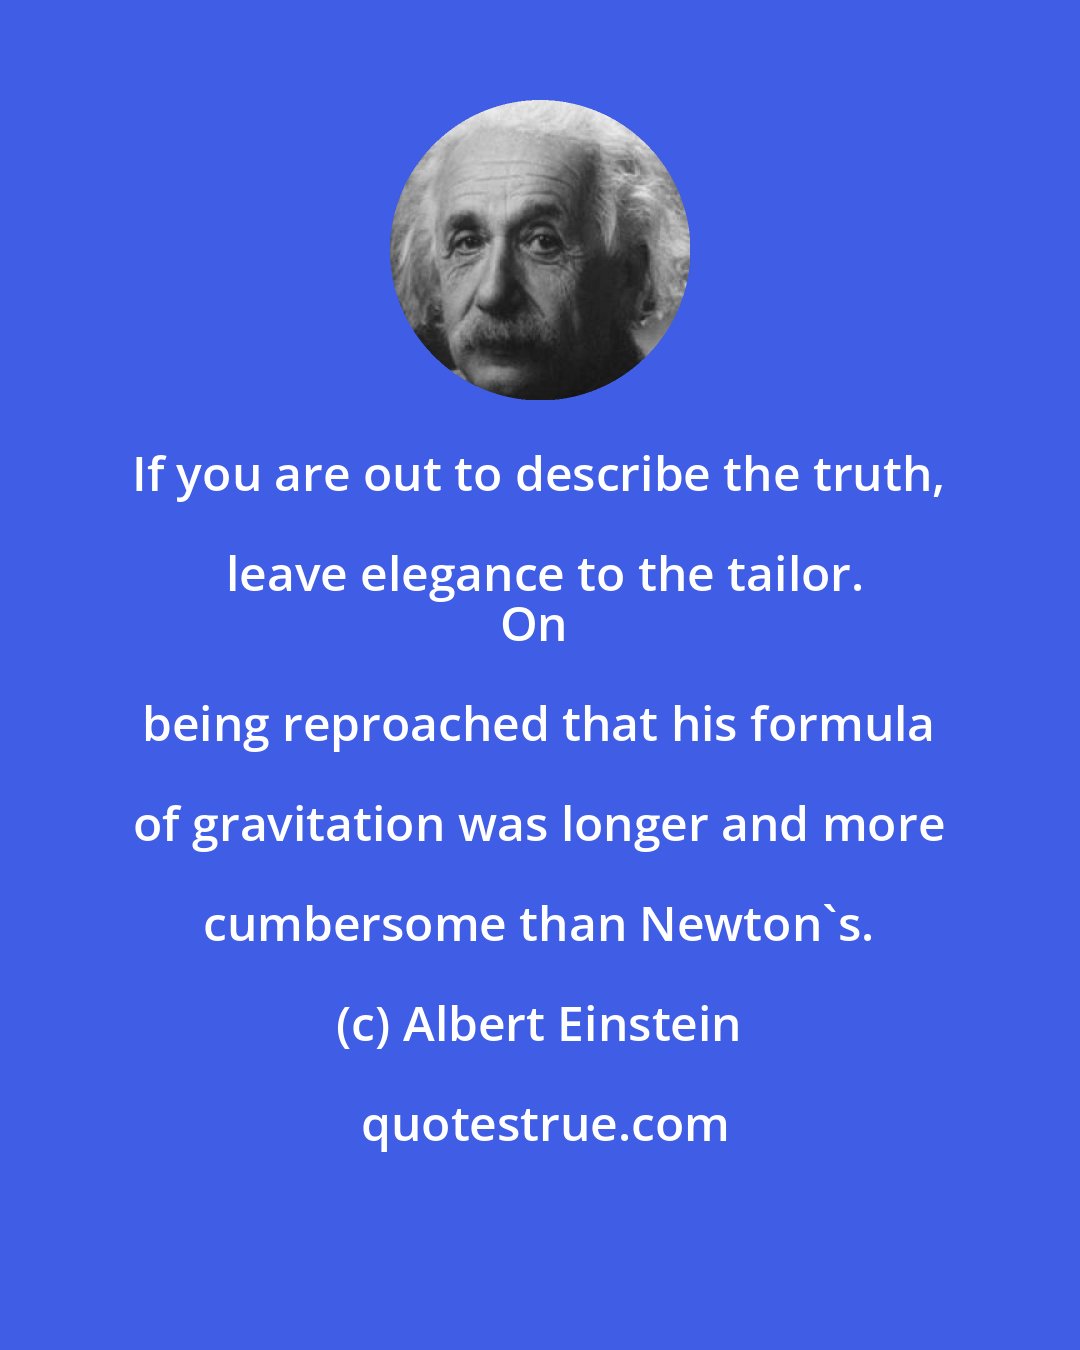 Albert Einstein: If you are out to describe the truth, leave elegance to the tailor.
On being reproached that his formula of gravitation was longer and more cumbersome than Newton's.